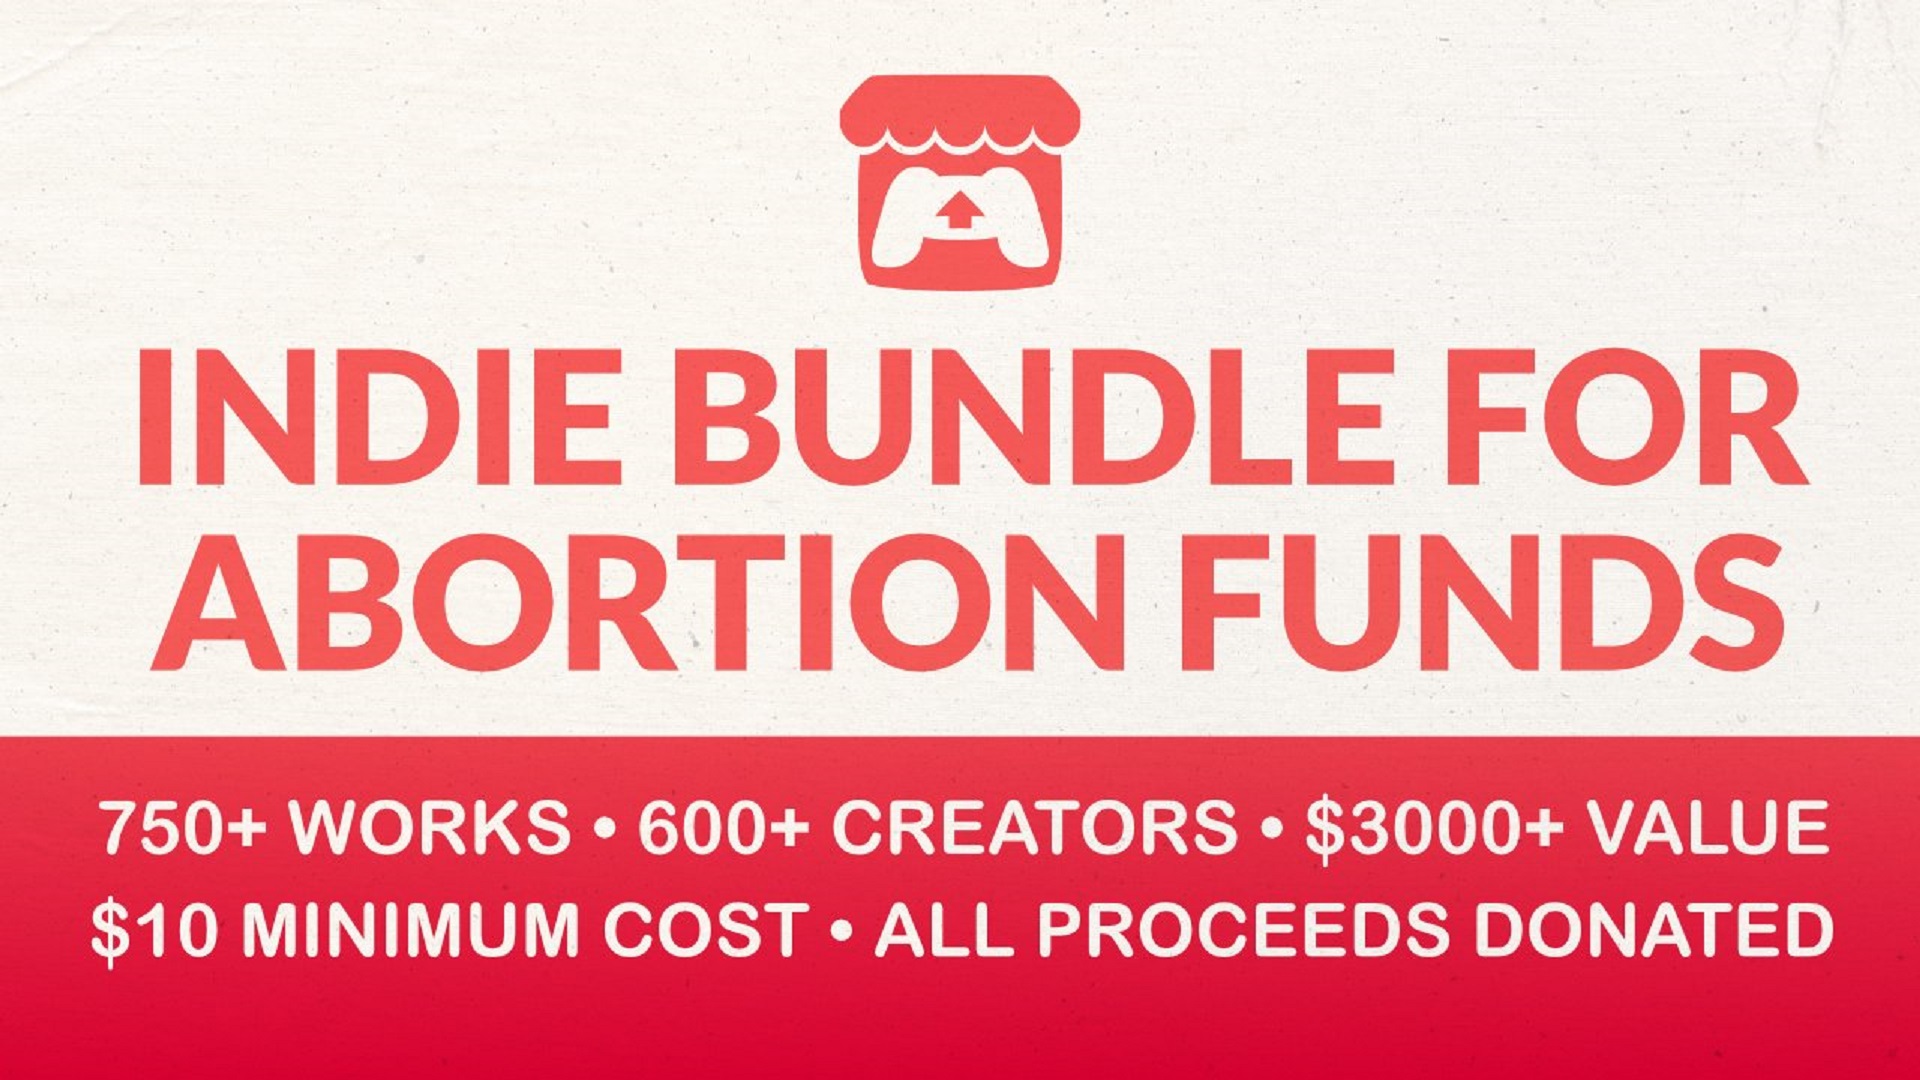  Itch.io Indie Bundle for Abortion Funds offers over 750 games for $10 